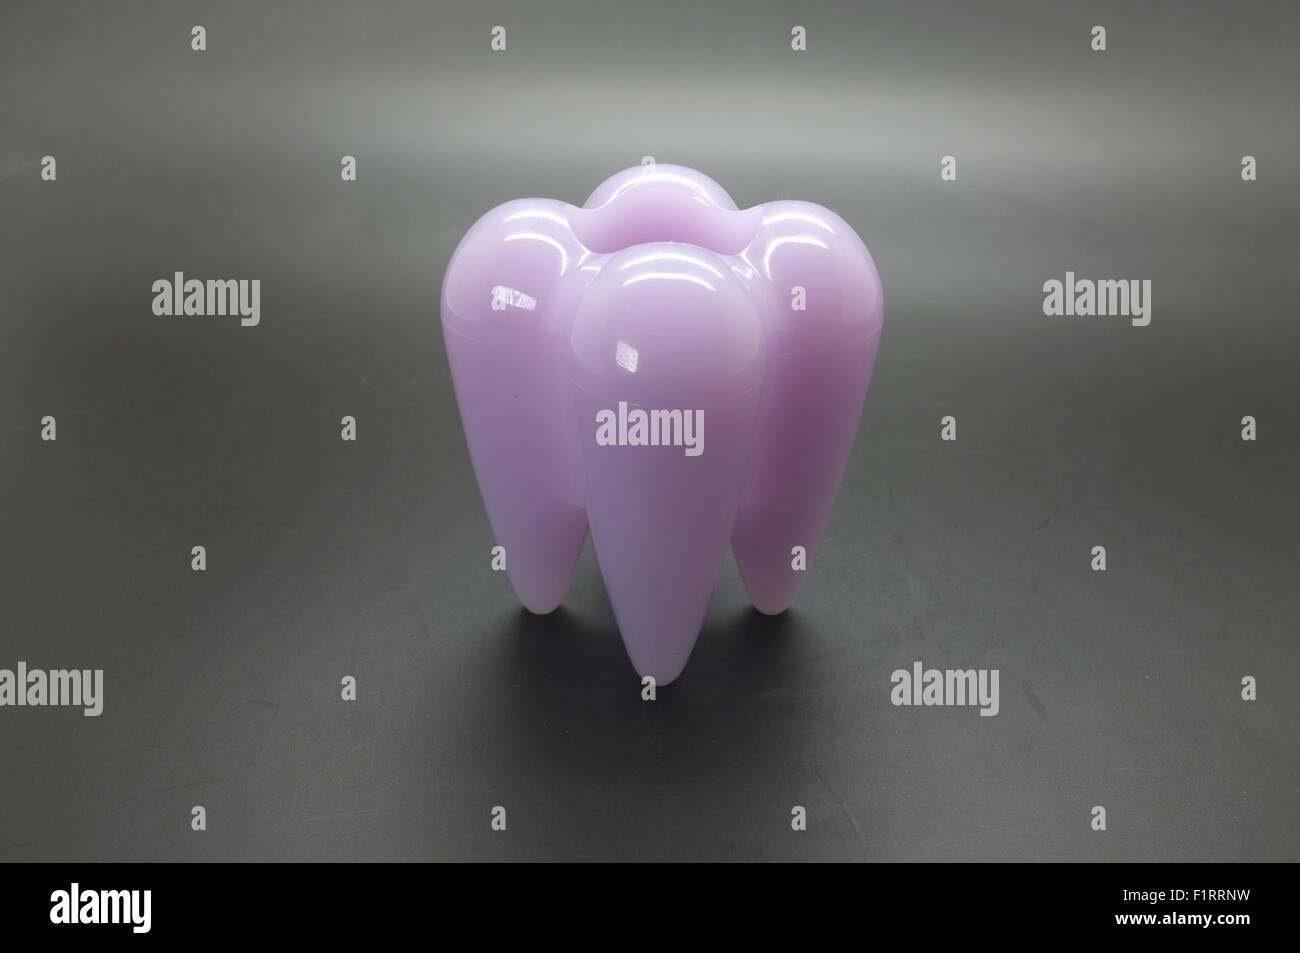 Human tooth model with hole Stock Photo